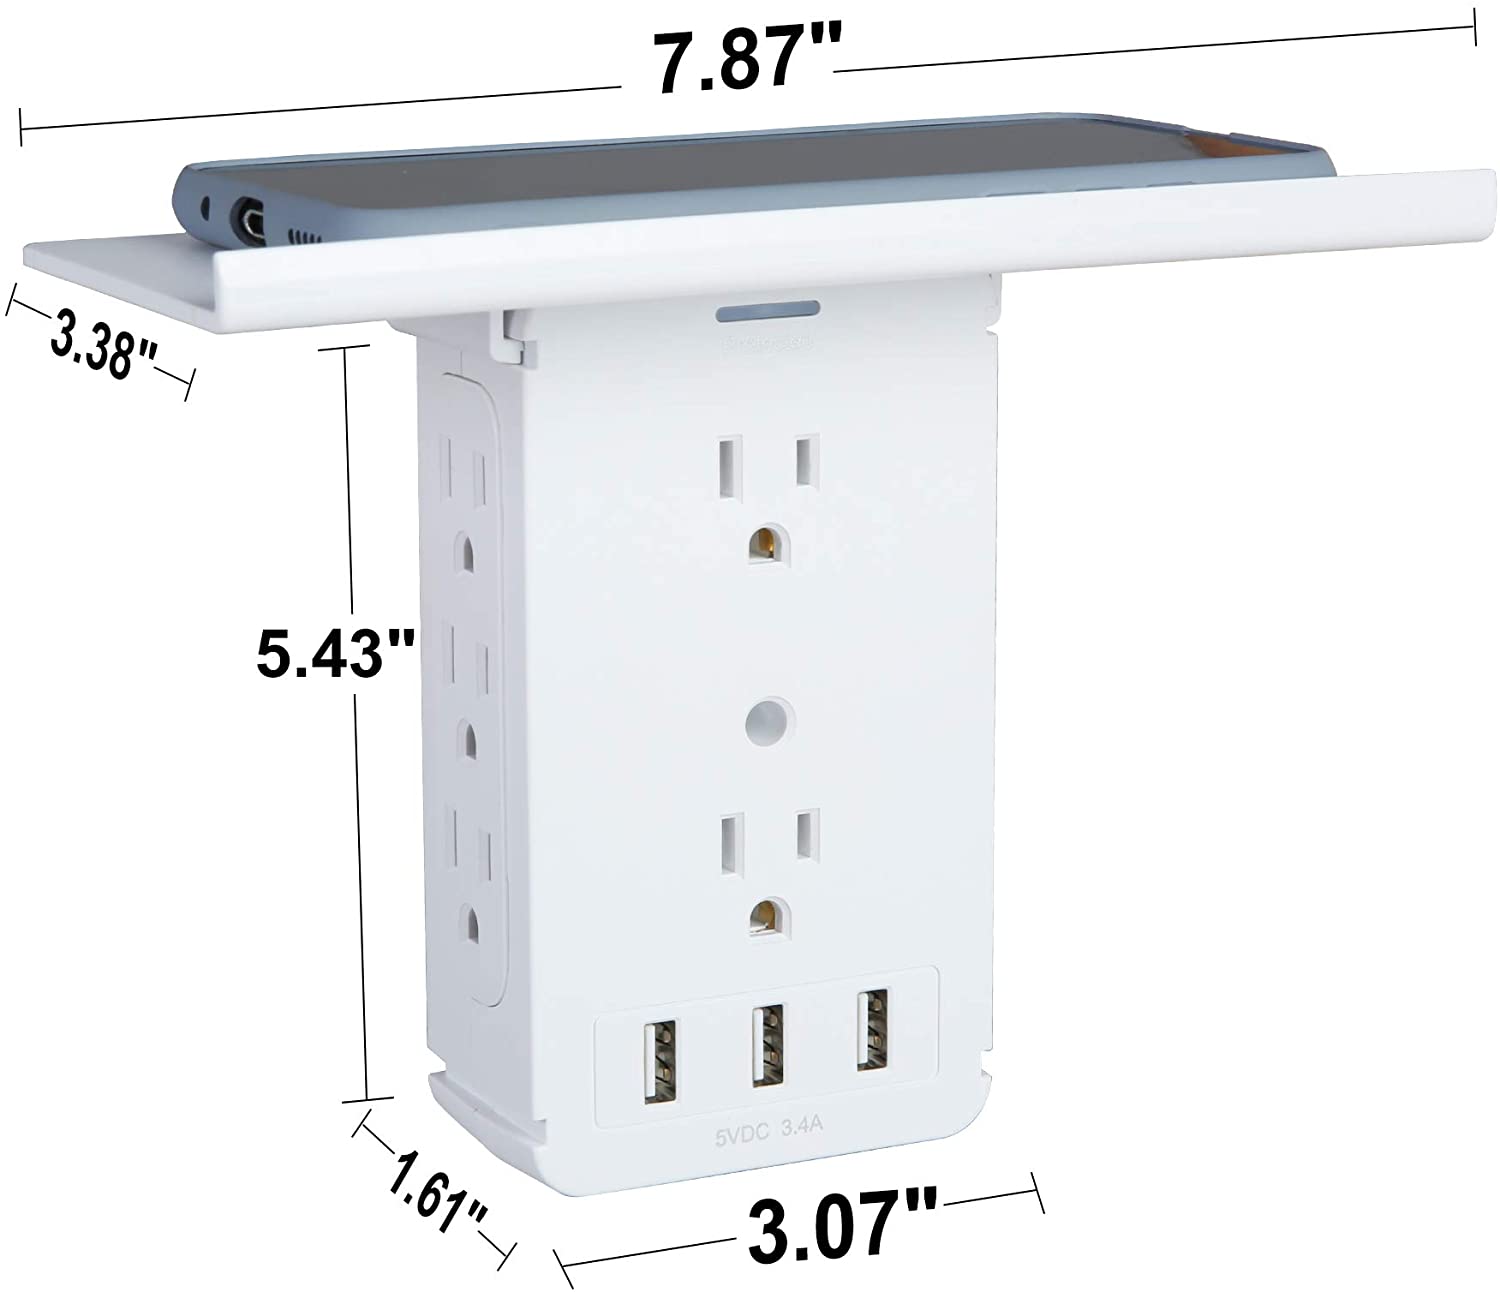 Wall Outlet Extender-2 Pack Surge Protector Multifunctional Outlet Wall Plug with 3 USB Ports(3.4A Total), 8 AC Outlets, Removable Outlet Shelf